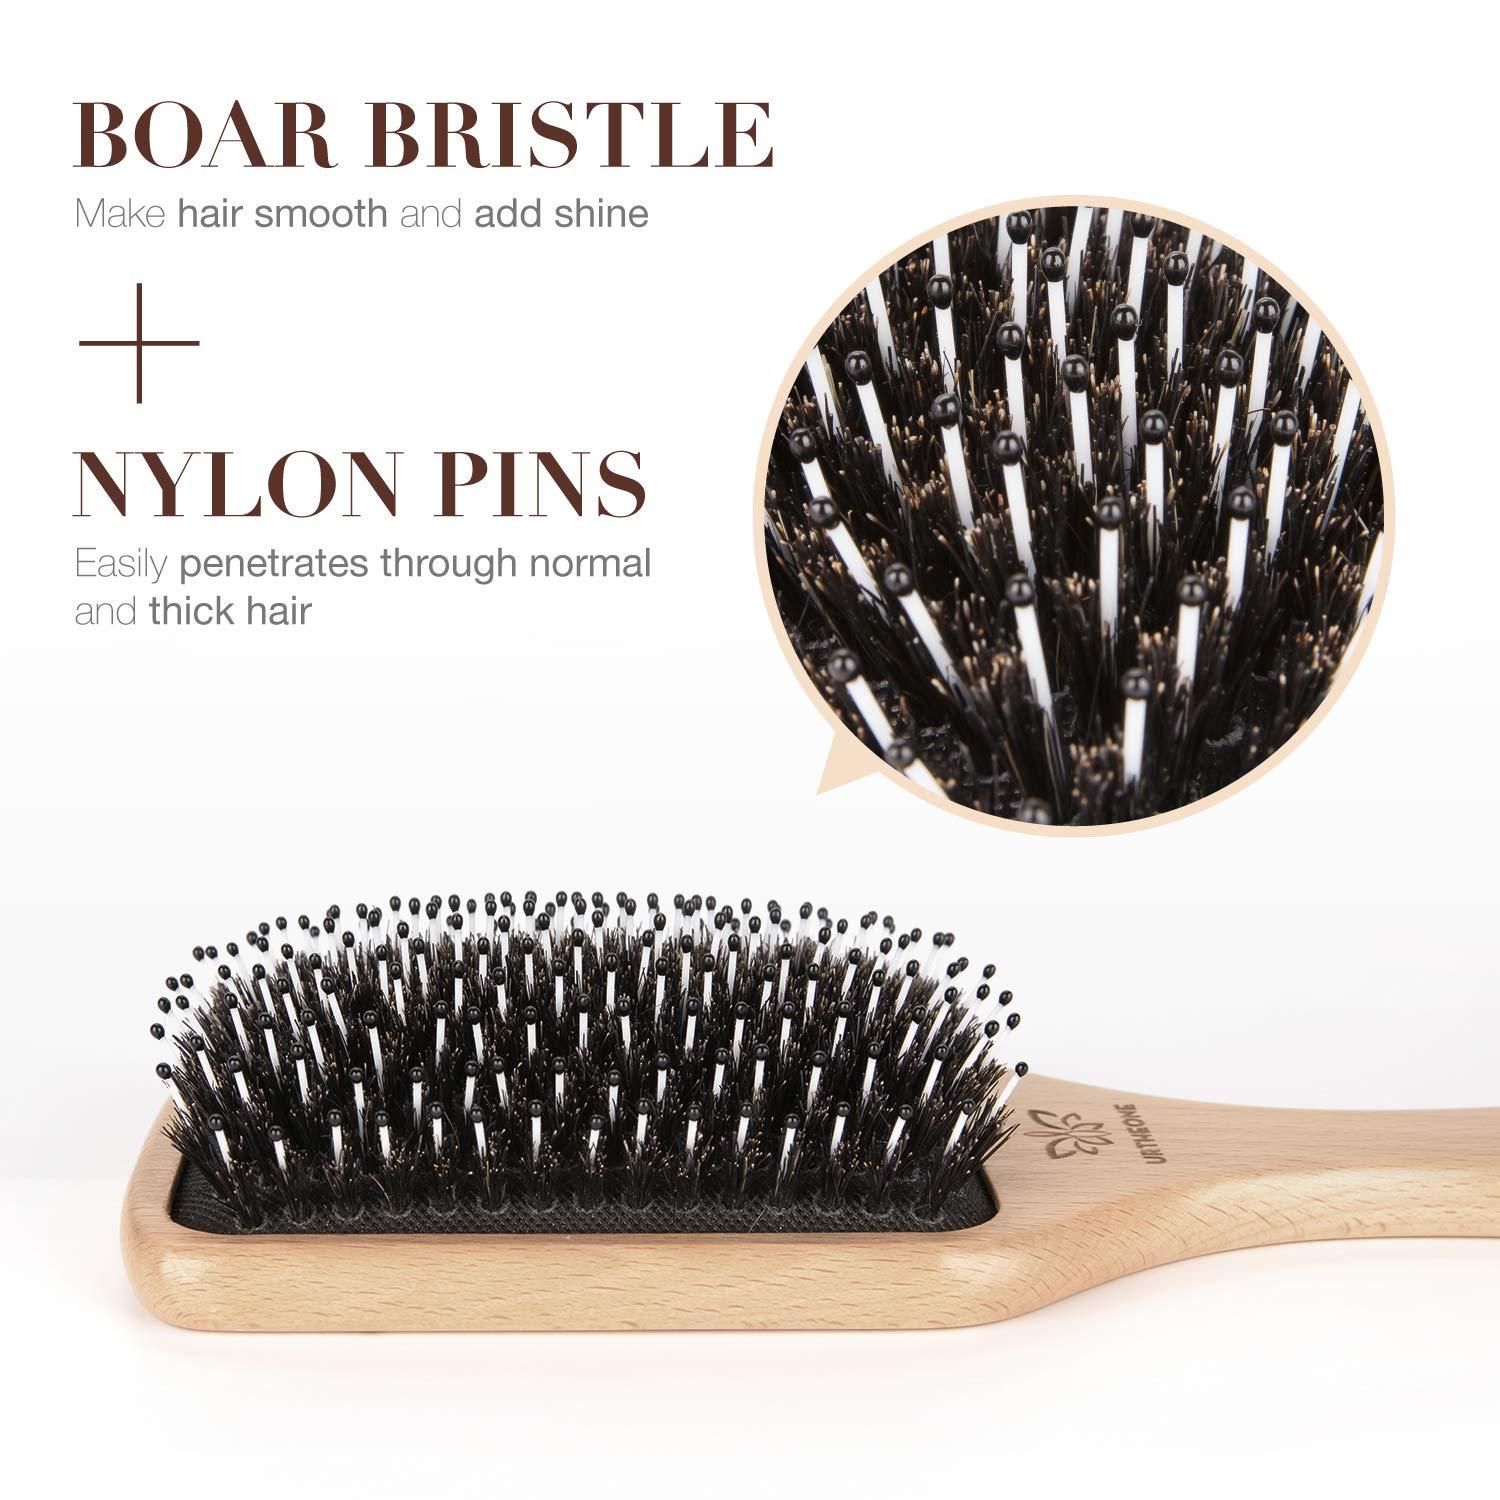 Hair Brush Boar Bristle Hairbrush for Thick Curly Thin Long Short Wet or  Dry Hair Adds Shine and Makes Hair Smooth, Best Paddle Hair Brush for Men  Women Kids